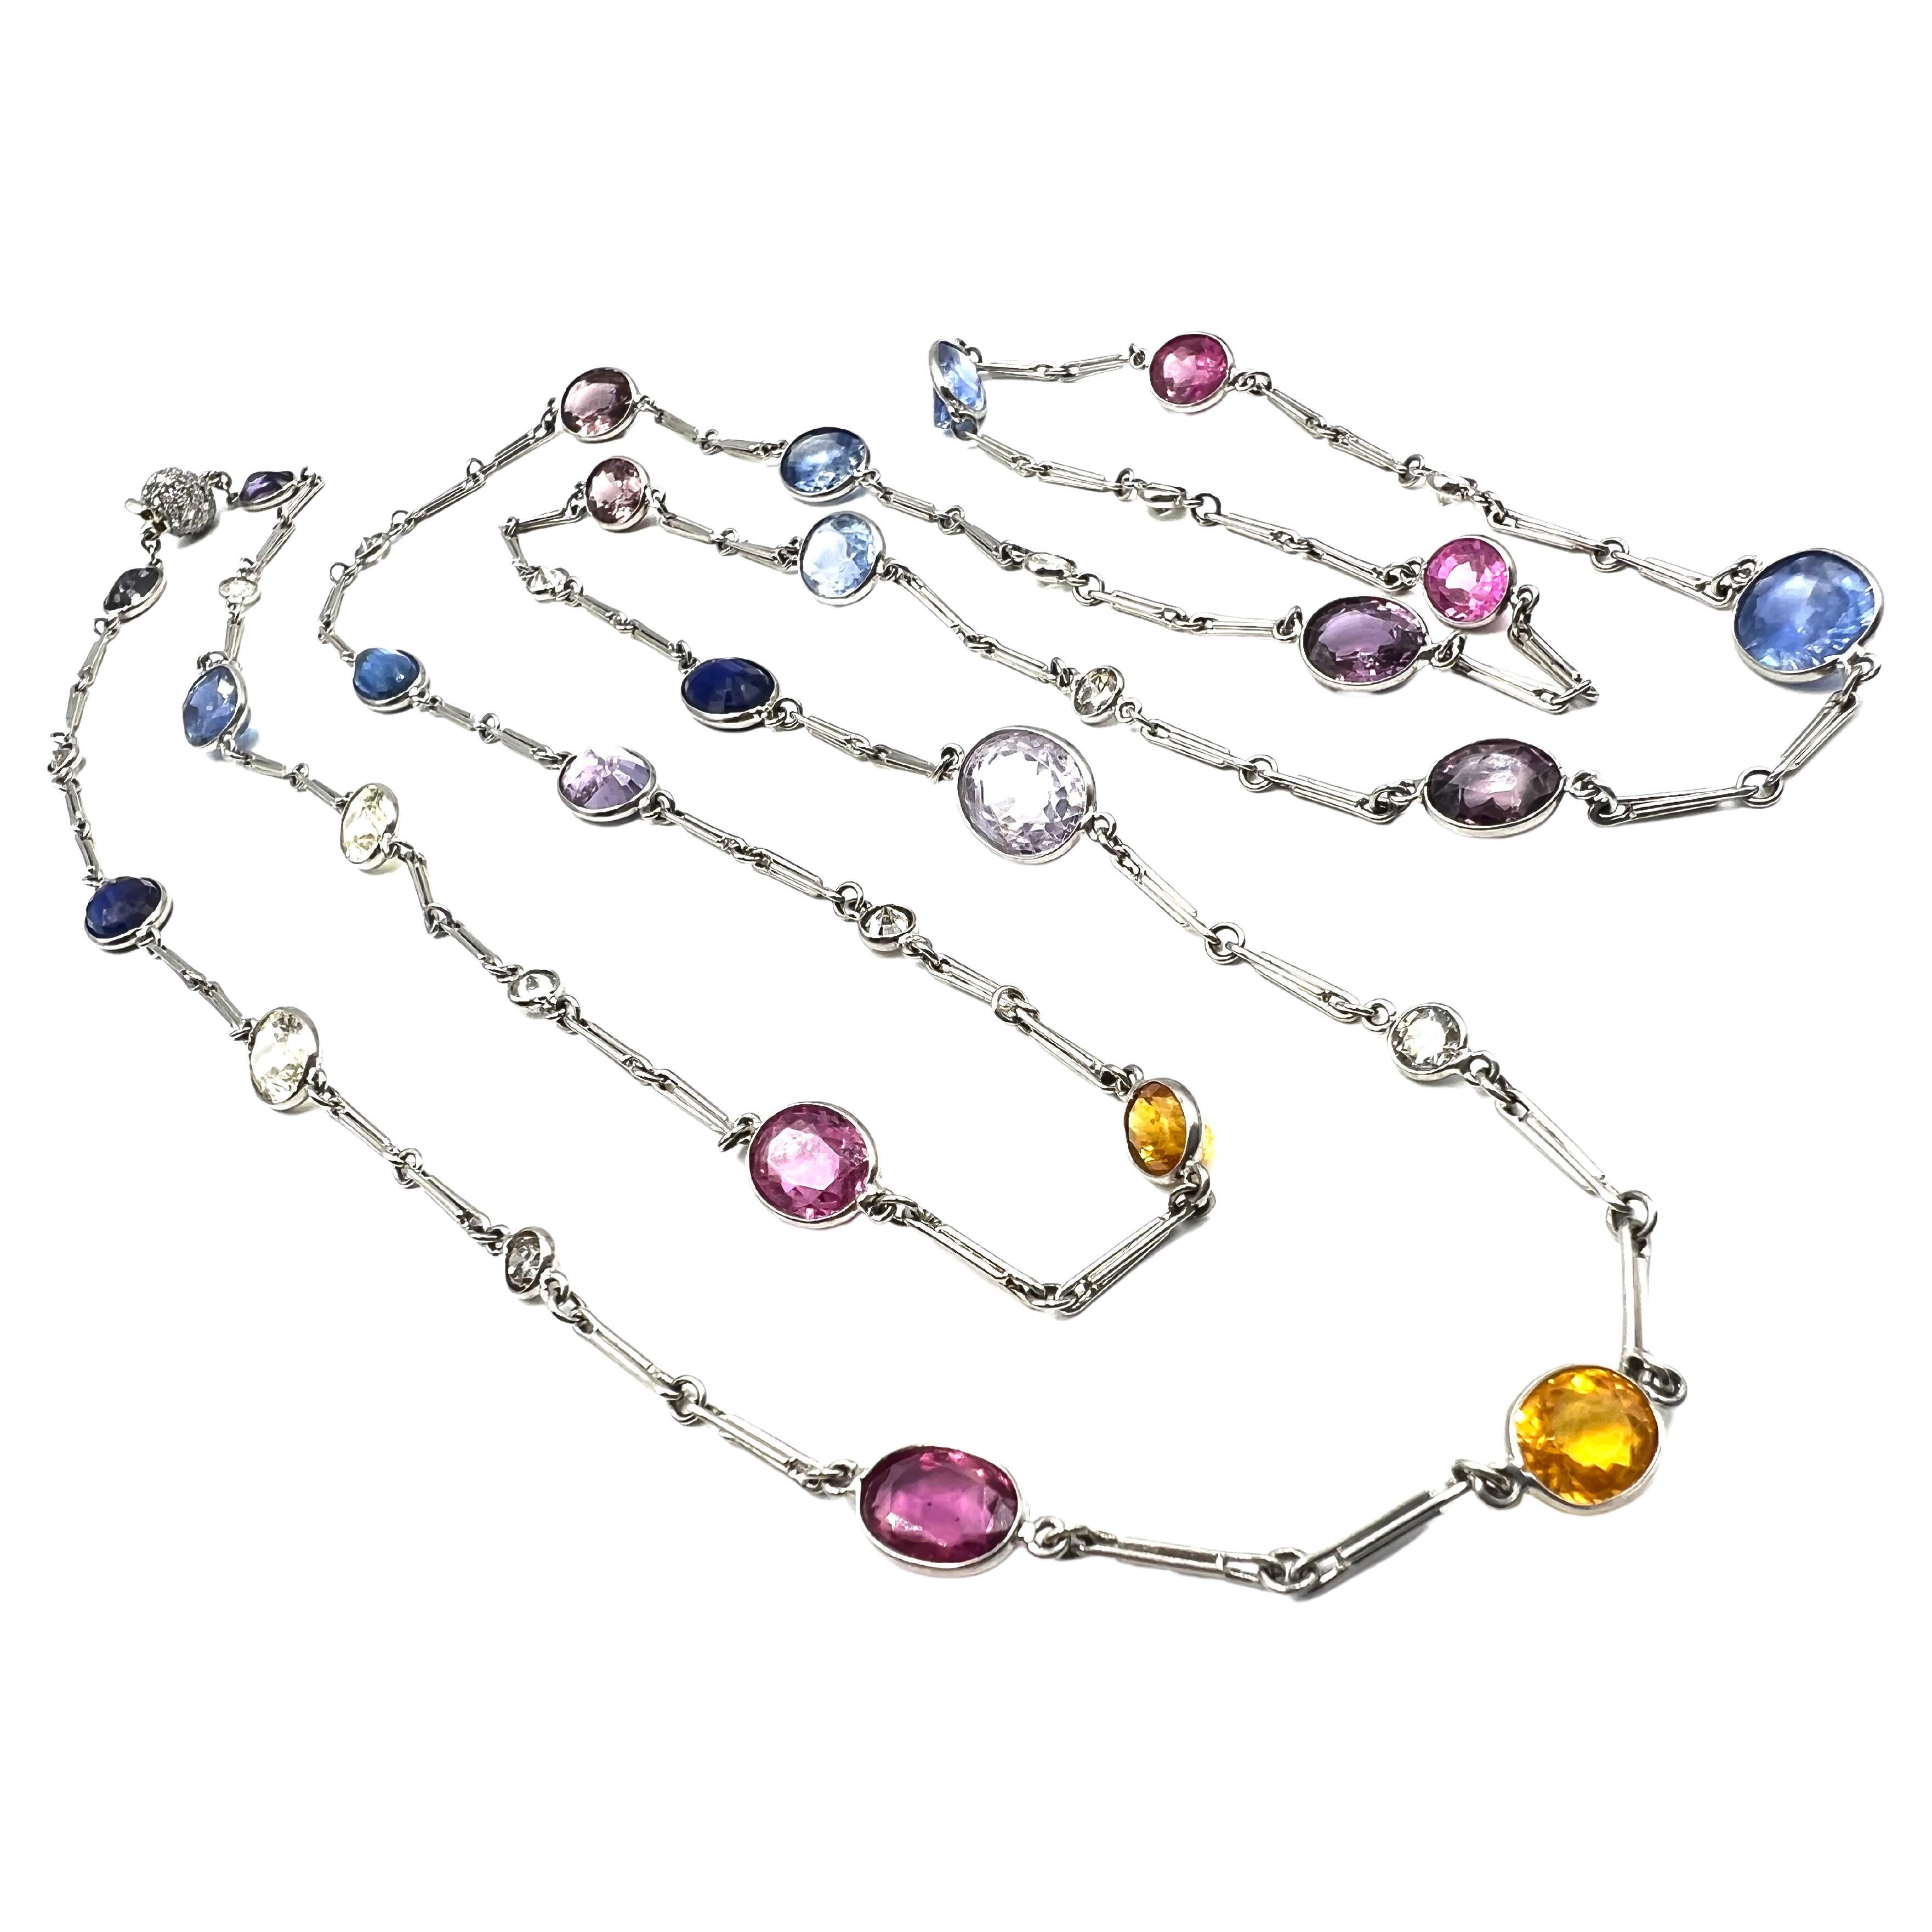 Platinum chain necklace in a gemstone by the yard design, featuring alternating multicolored sapphires and diamonds. Bezel set with 24 oval mixed cut sapphires totaling approximately 37.25 carats (two pale yellow, two yellowish-orange, six